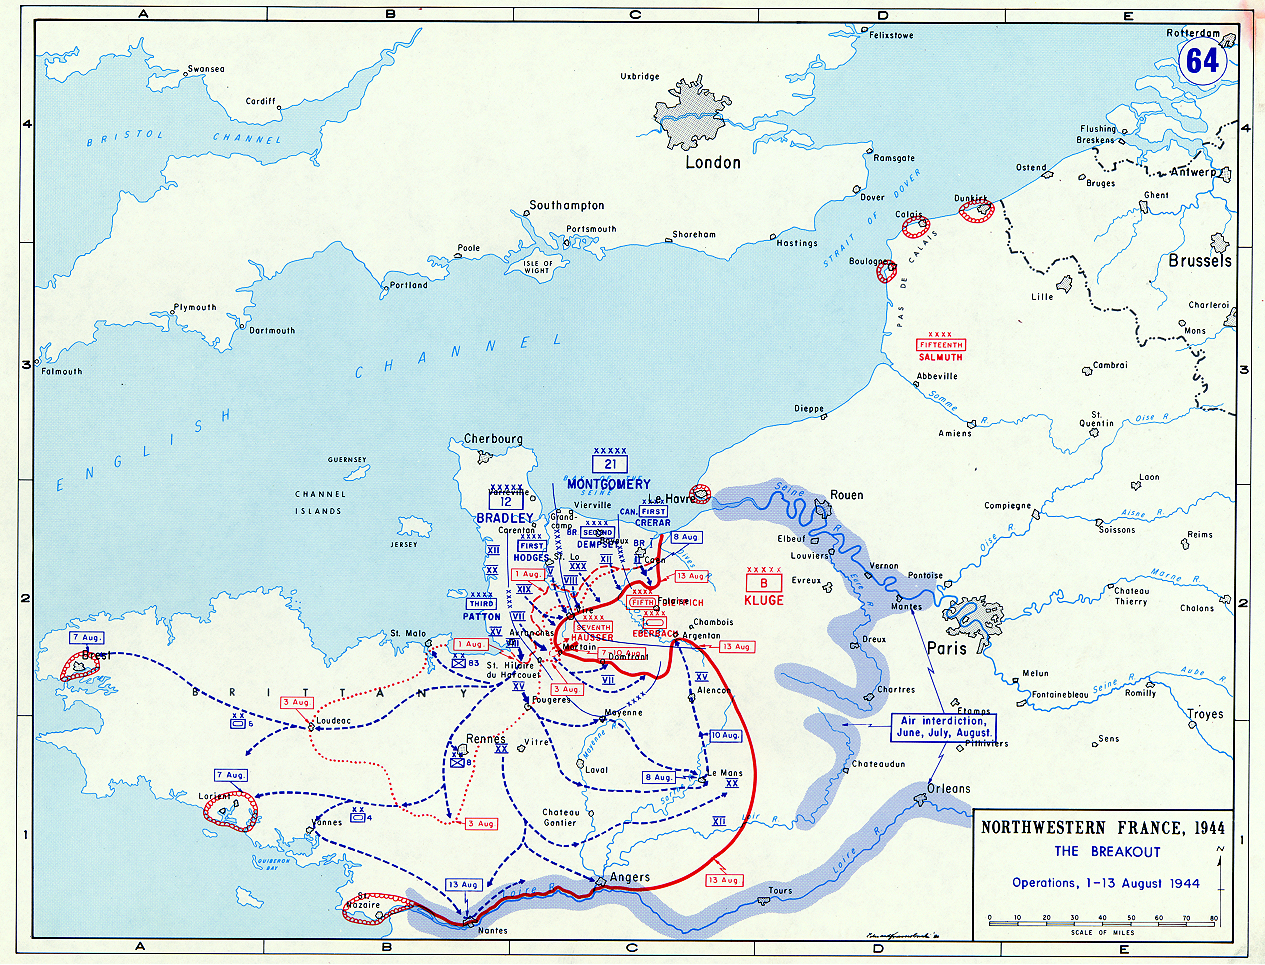 Map depicting the Allied breakout in Normandy, France, 1-13 Aug 1944